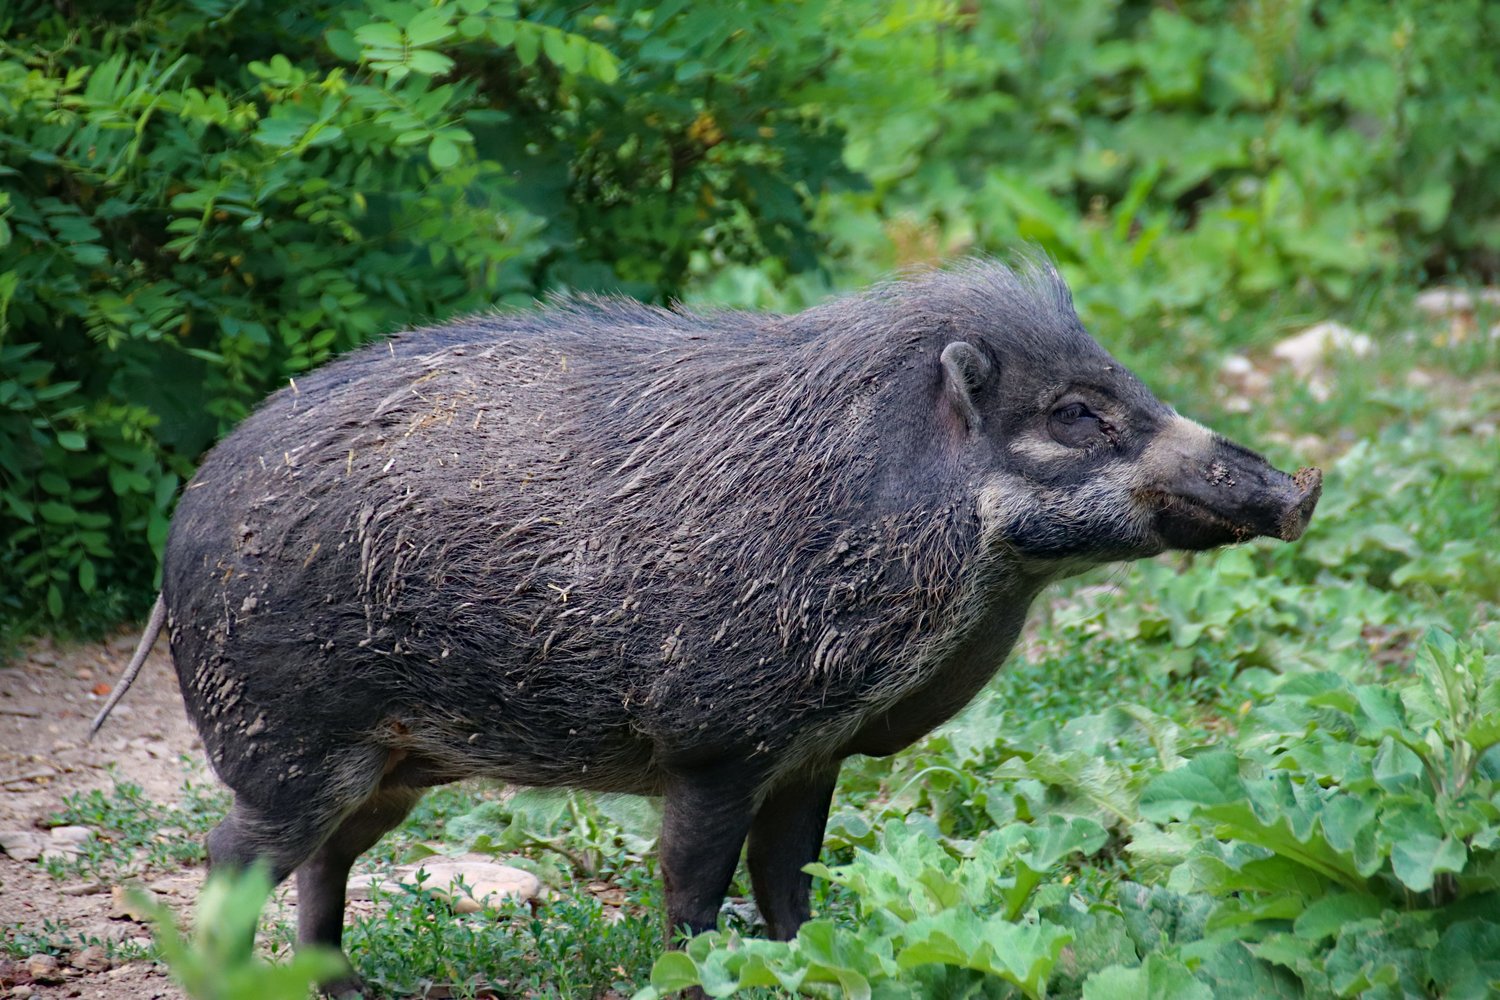 As they roam grazing land, feral swine carry pathogens that cause multiple diseases in cattle, like Brucella.